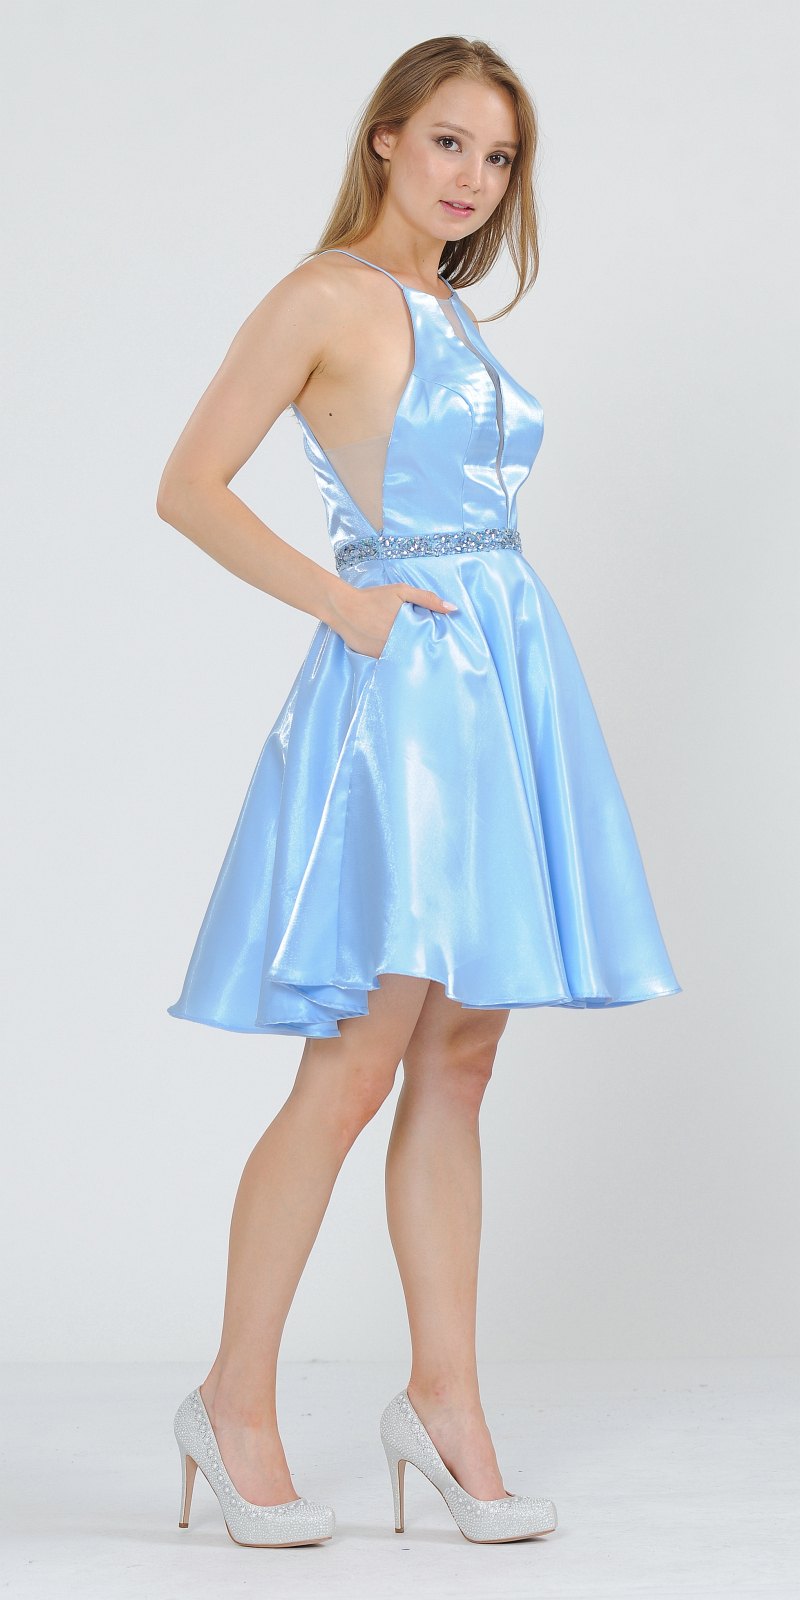 Poly USA 8236 Halter with Pockets Short Homecoming Dress Baby Blue